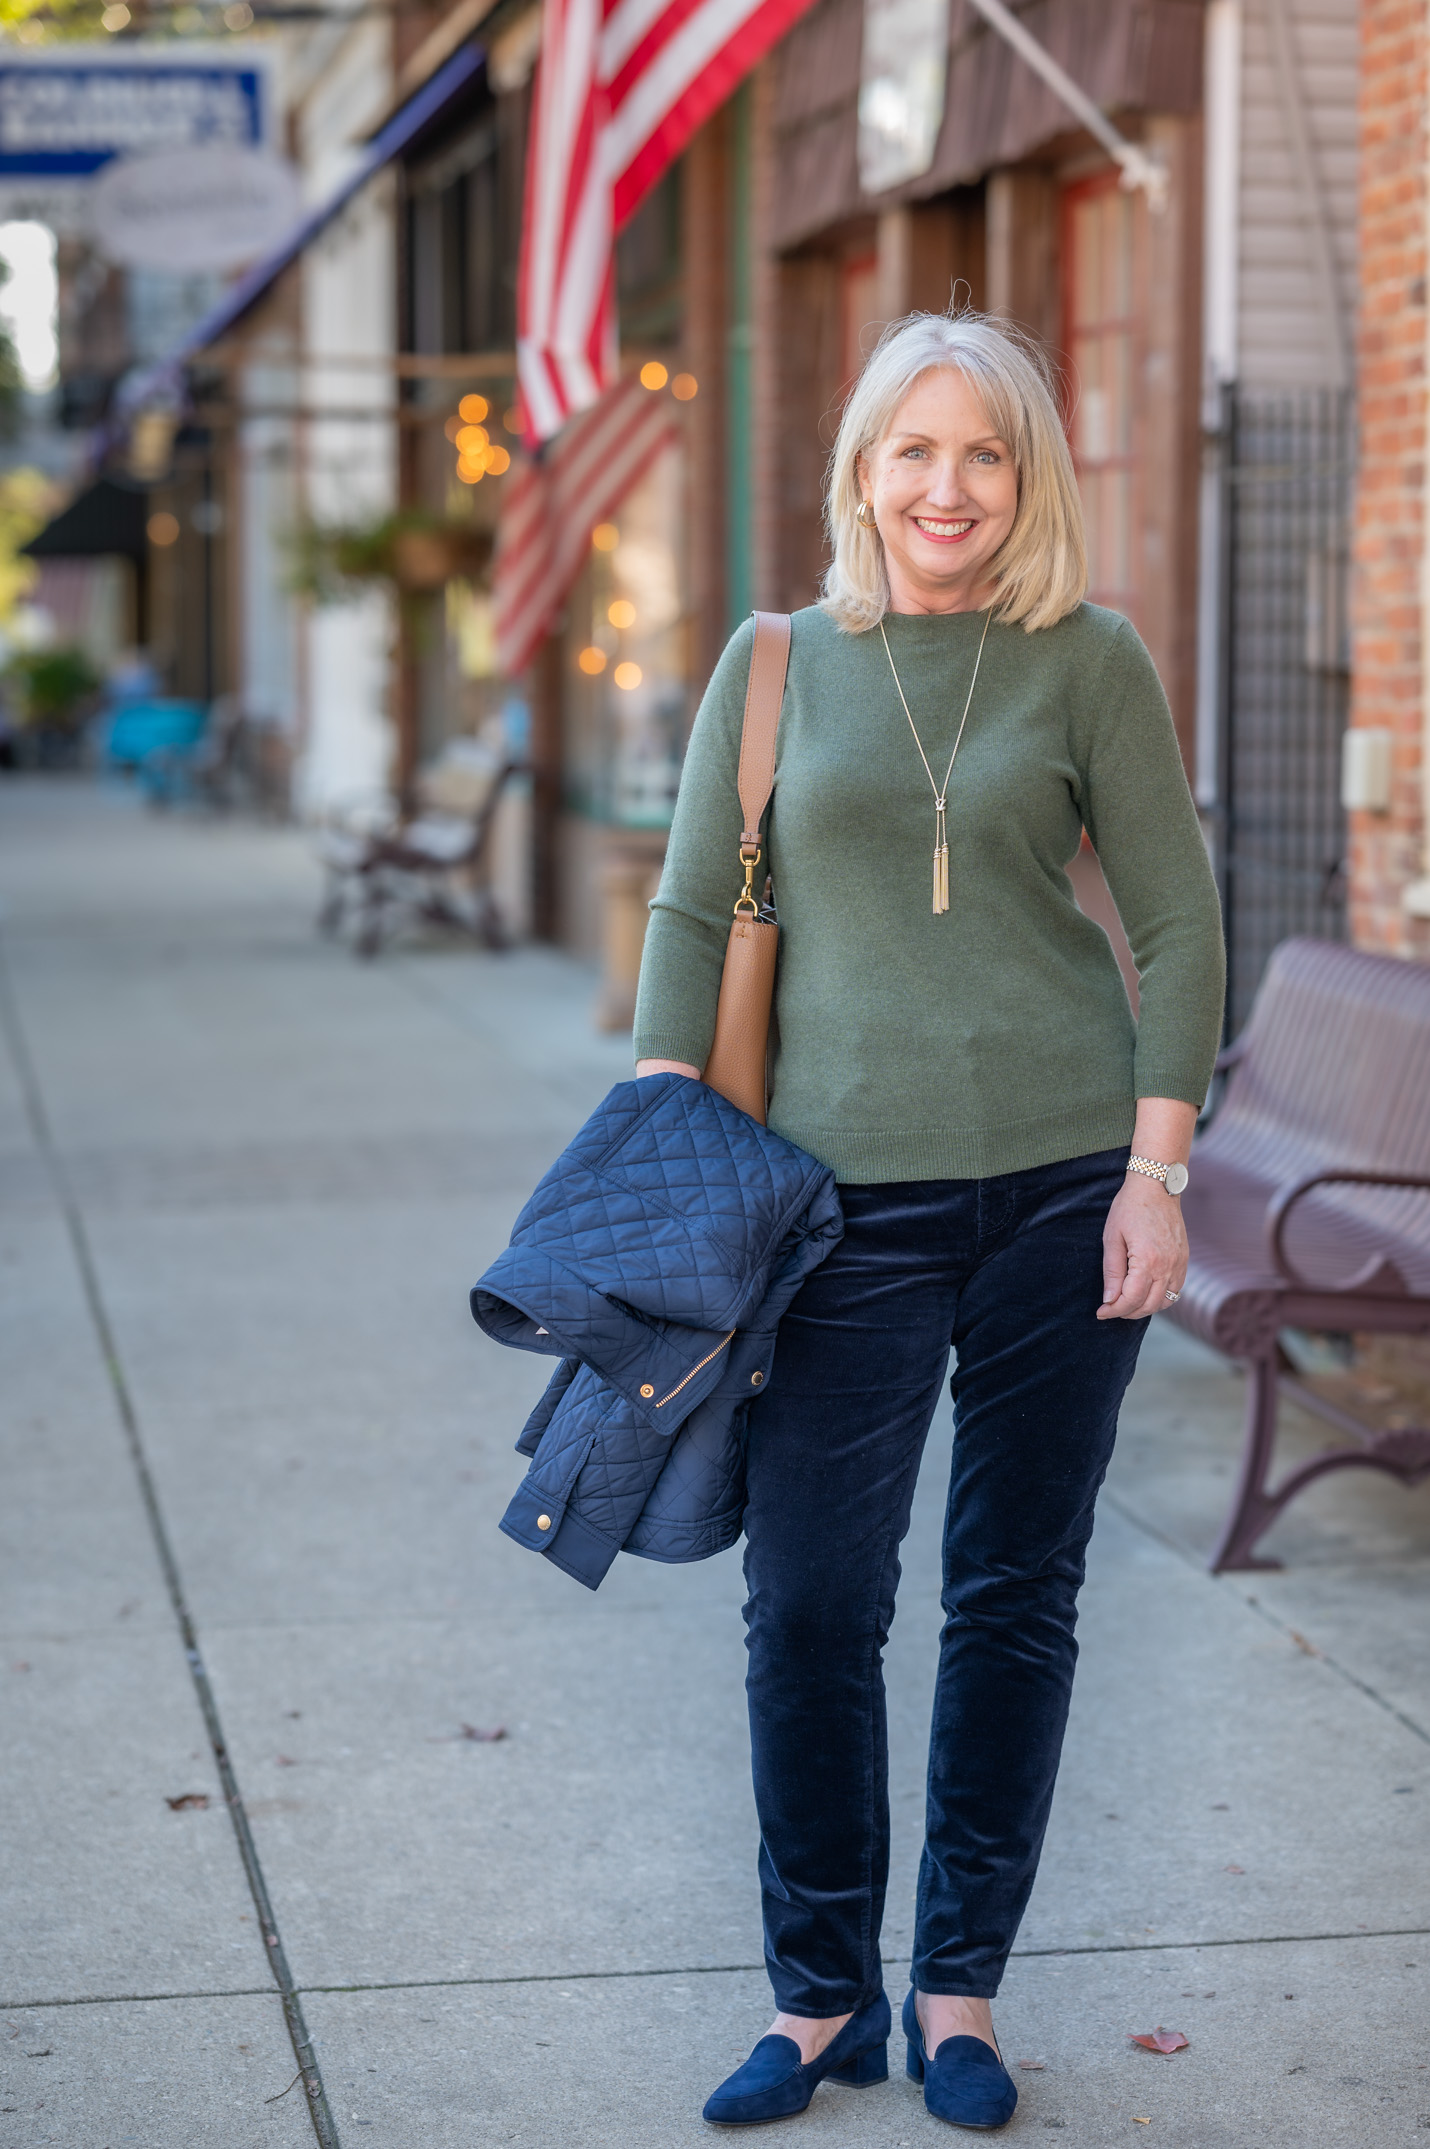 Classic Cashmere & Cords Outfit